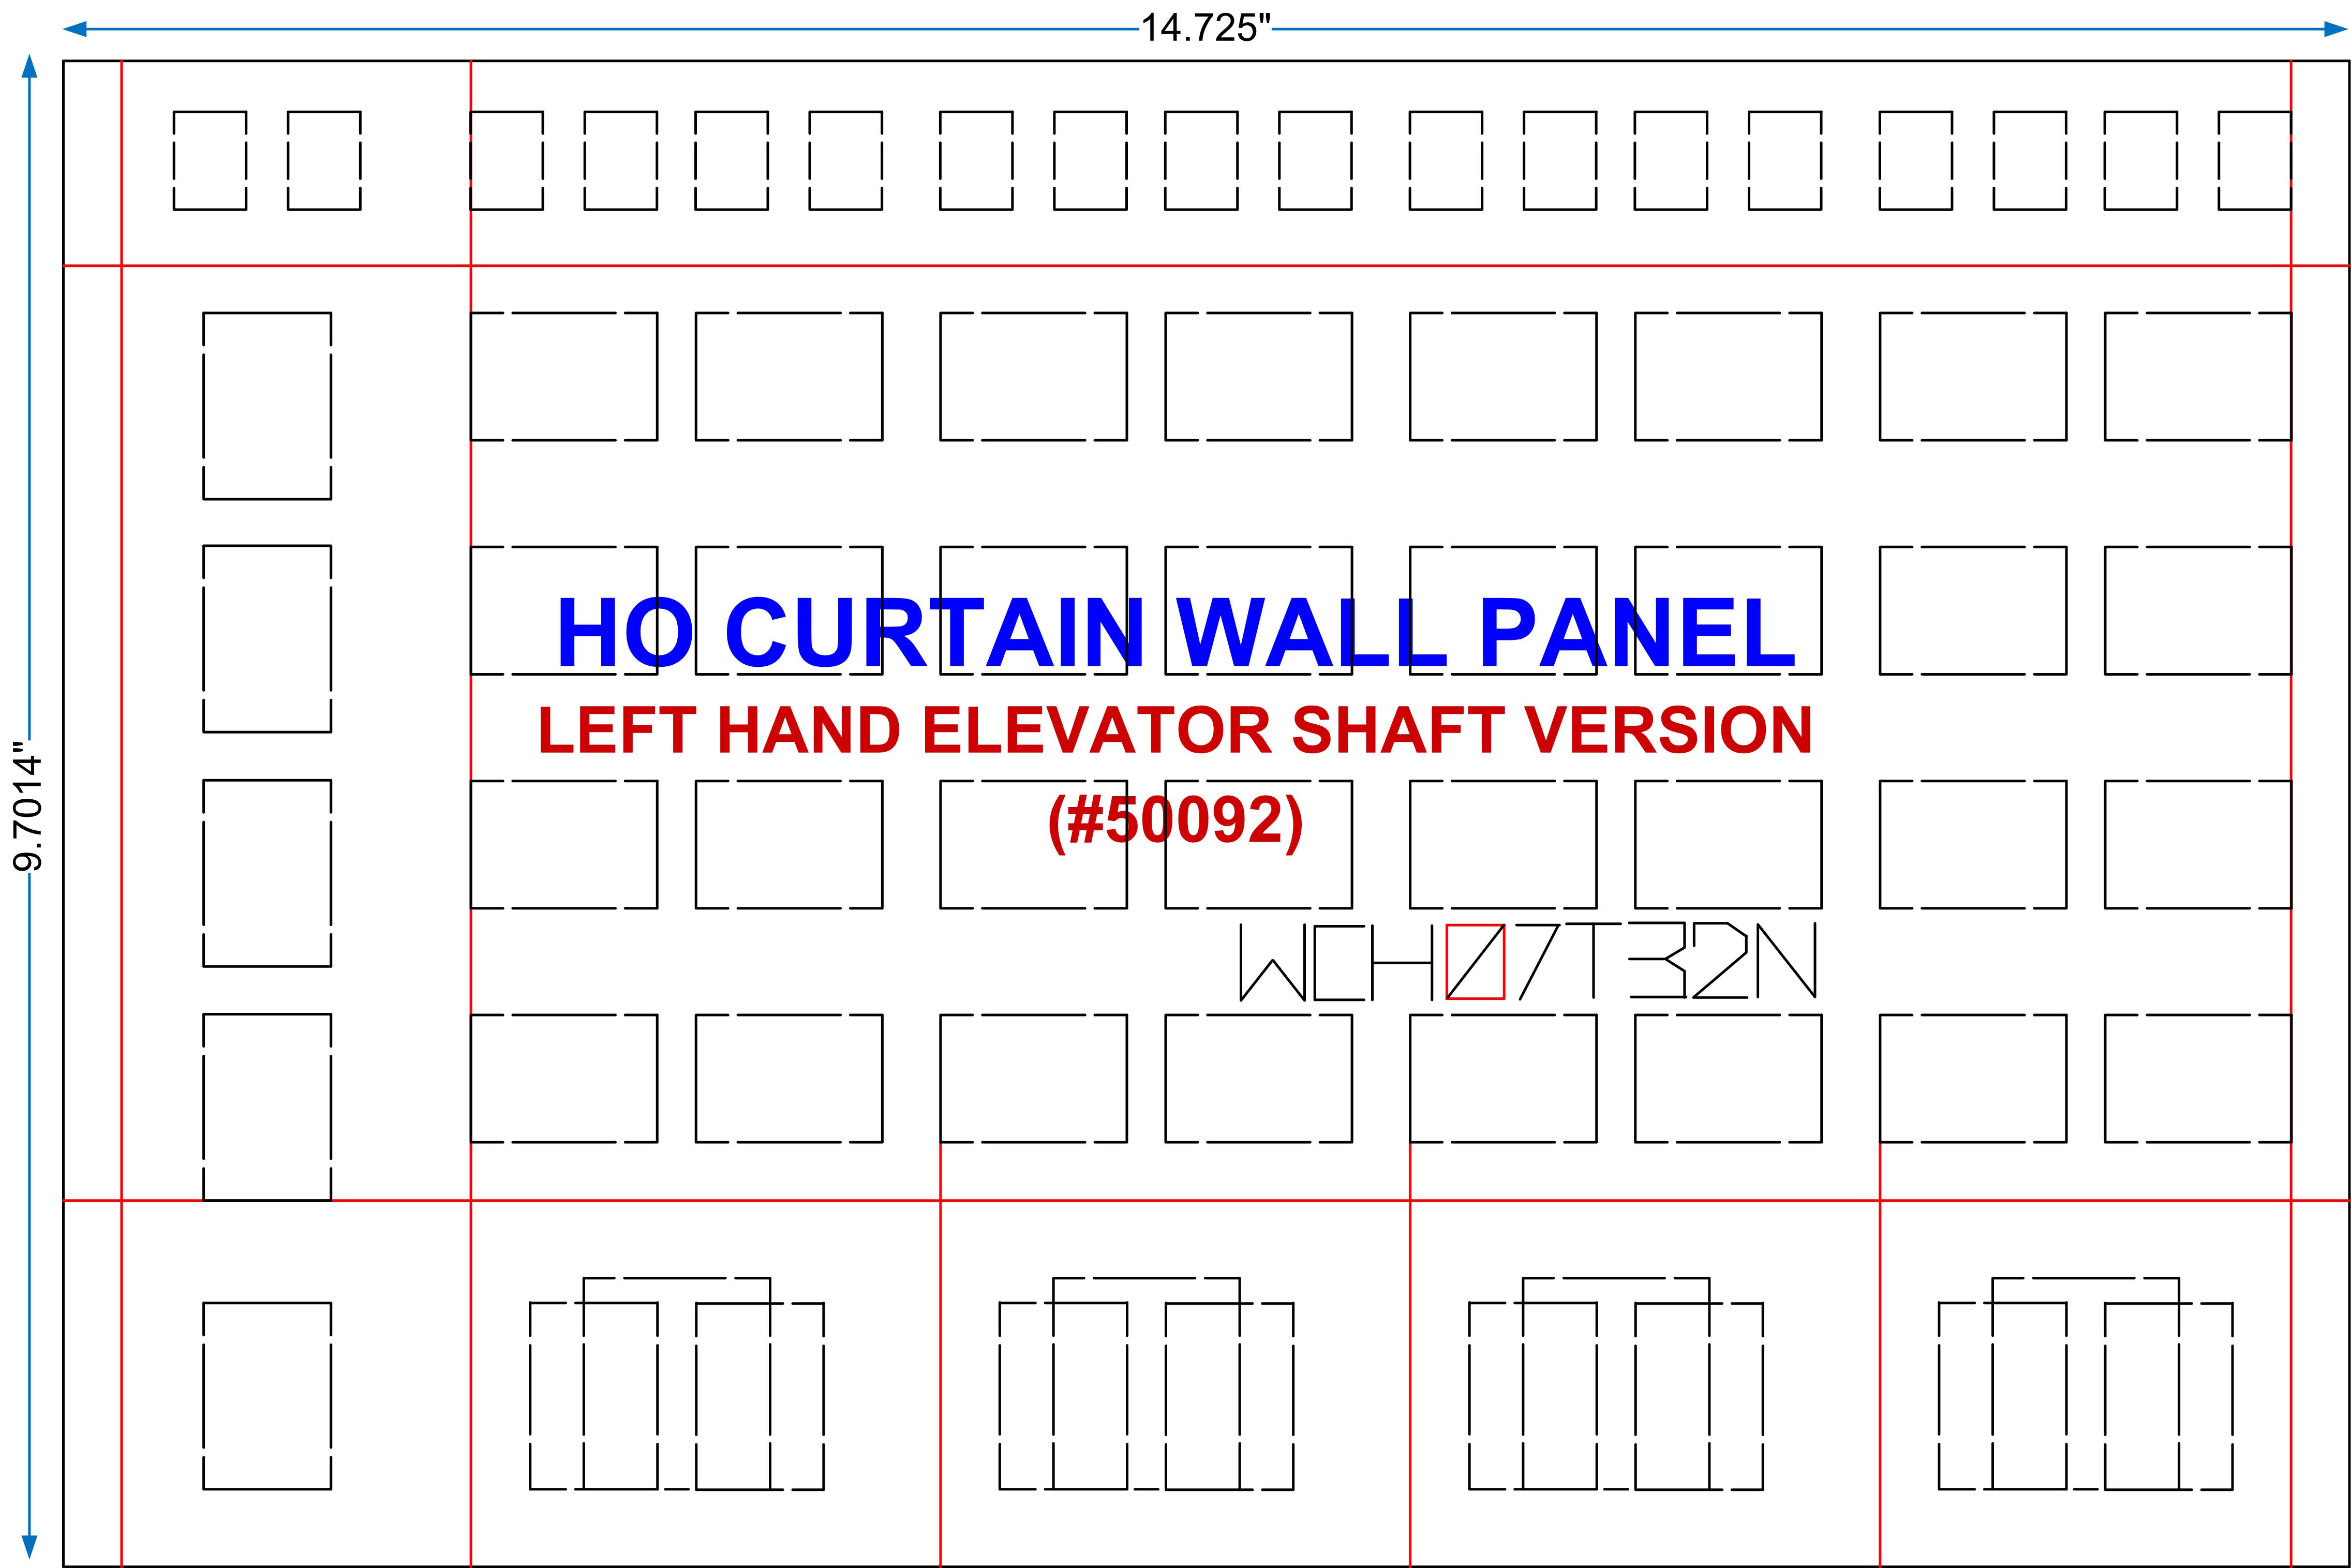 Curtain Wall System HO - Left Hand Panel Layout & Dimensions